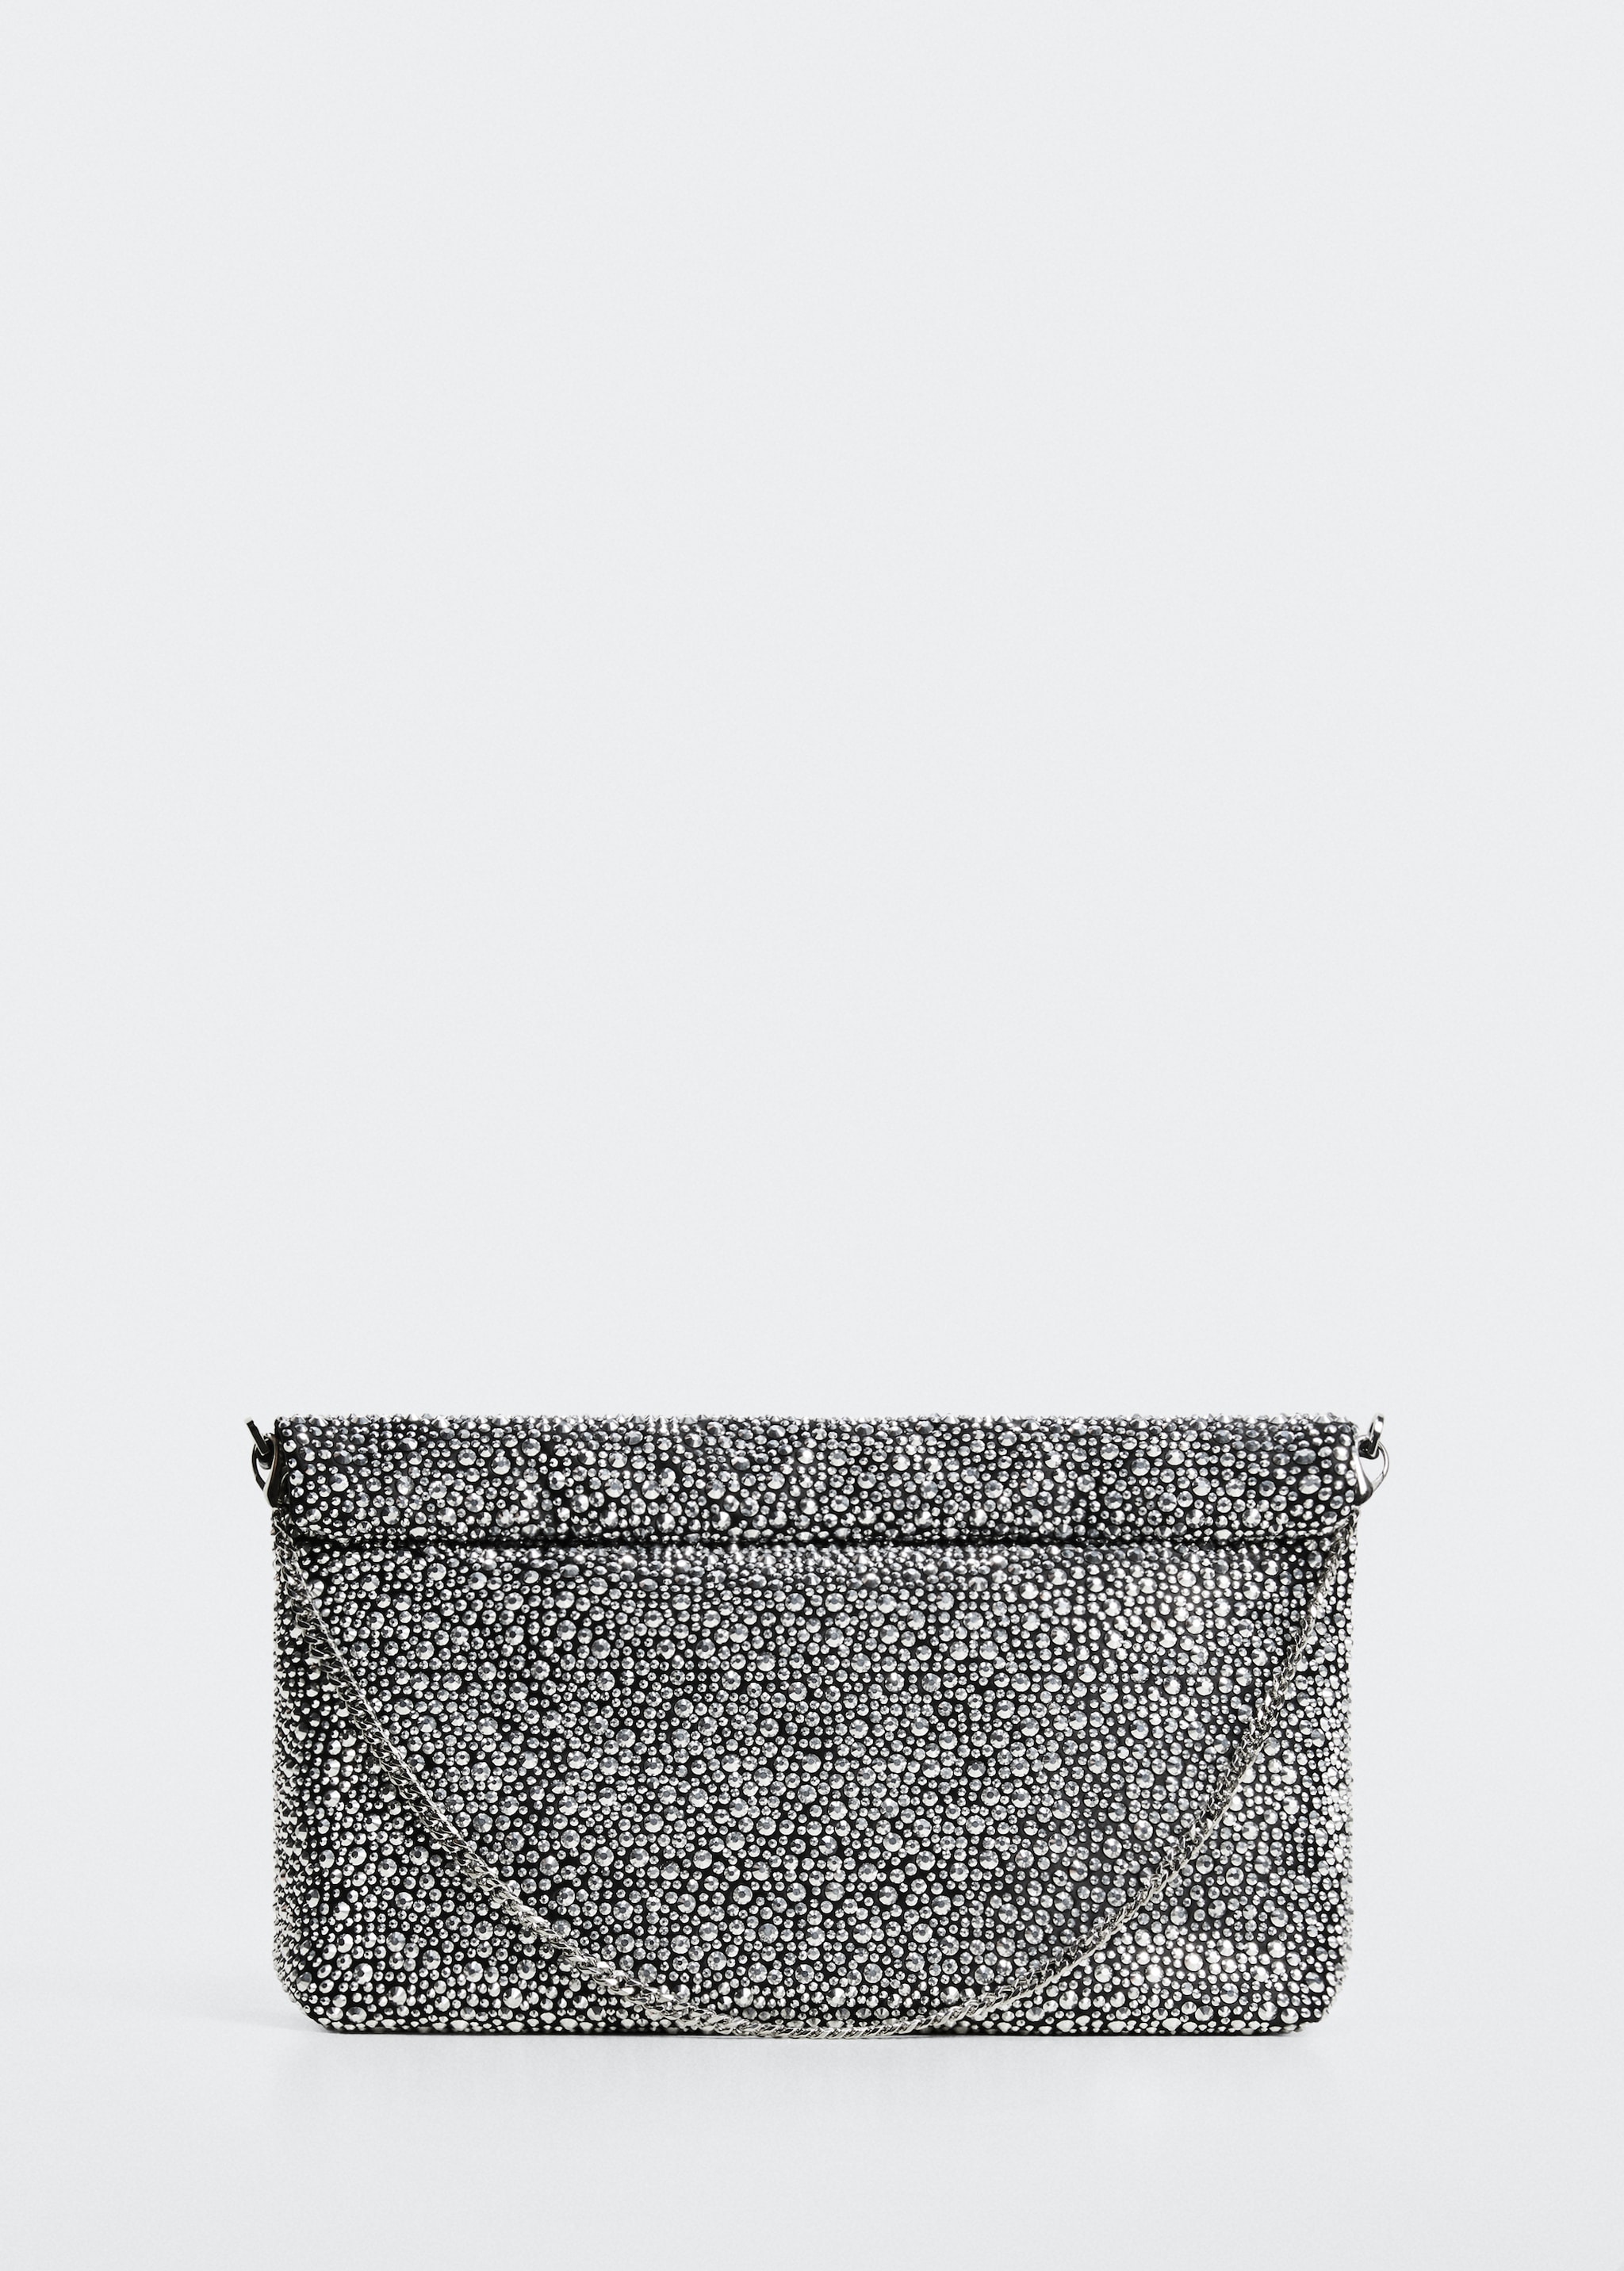 Rhinestone chain bag - Article without model